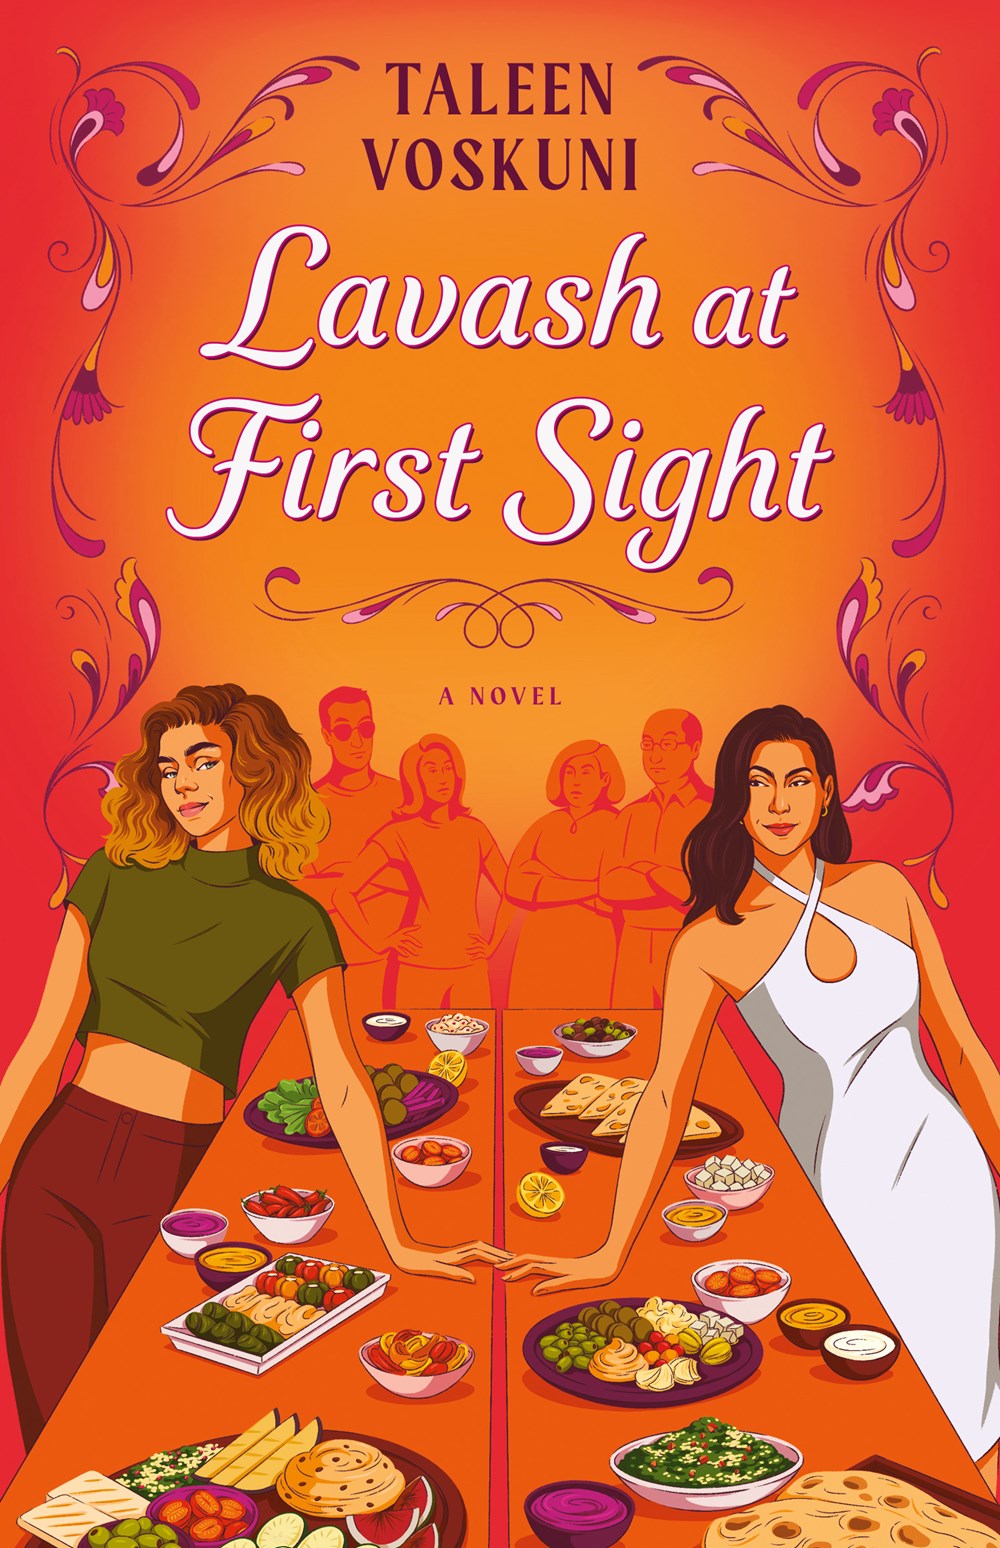 Lavash At First Sight by Taleen Voskuni (Paperback) (PREORDER)